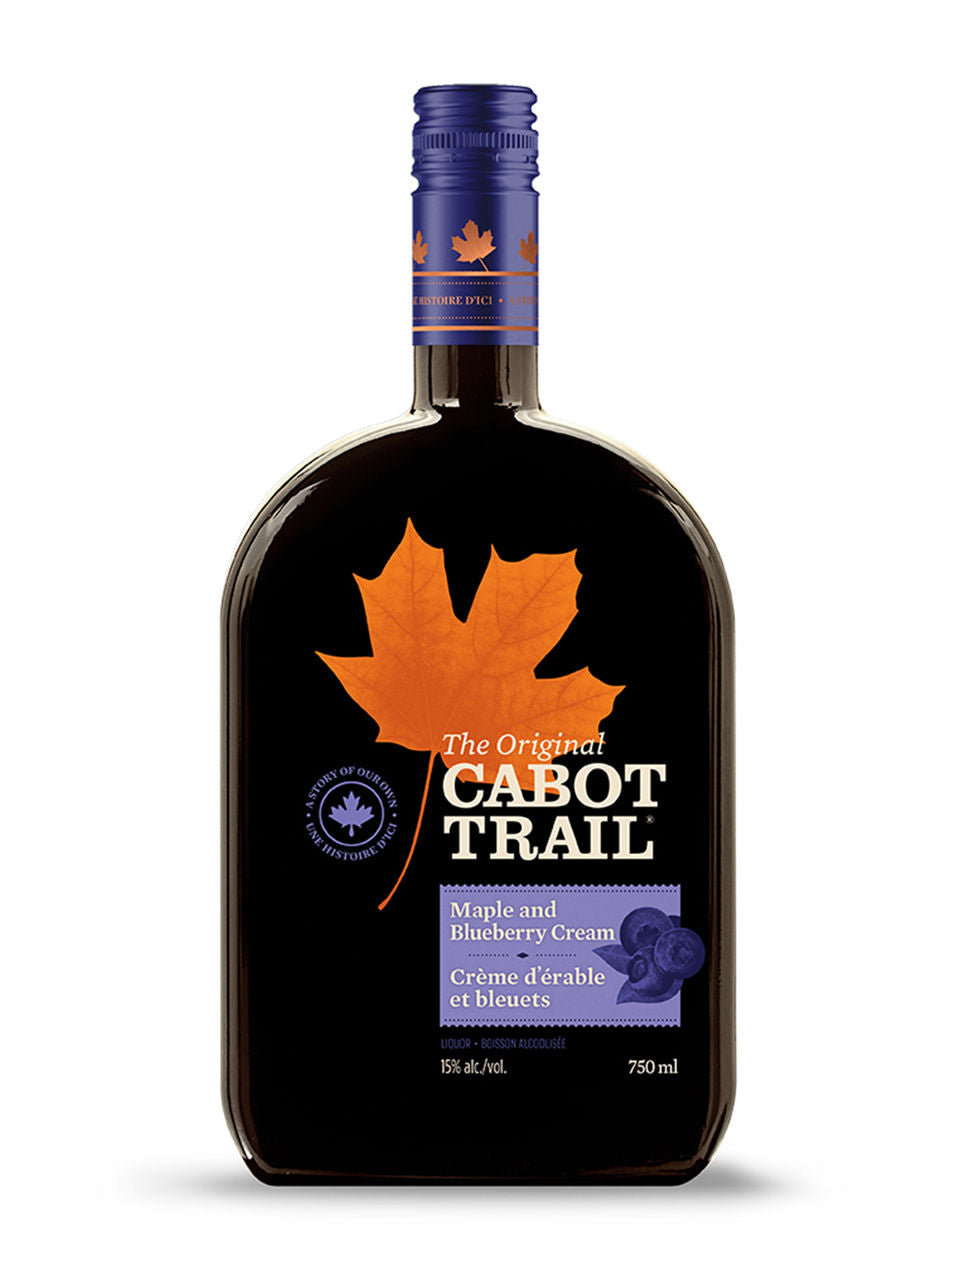 Cabot Trail Maple and Blueberry Cream 750 ml bottle